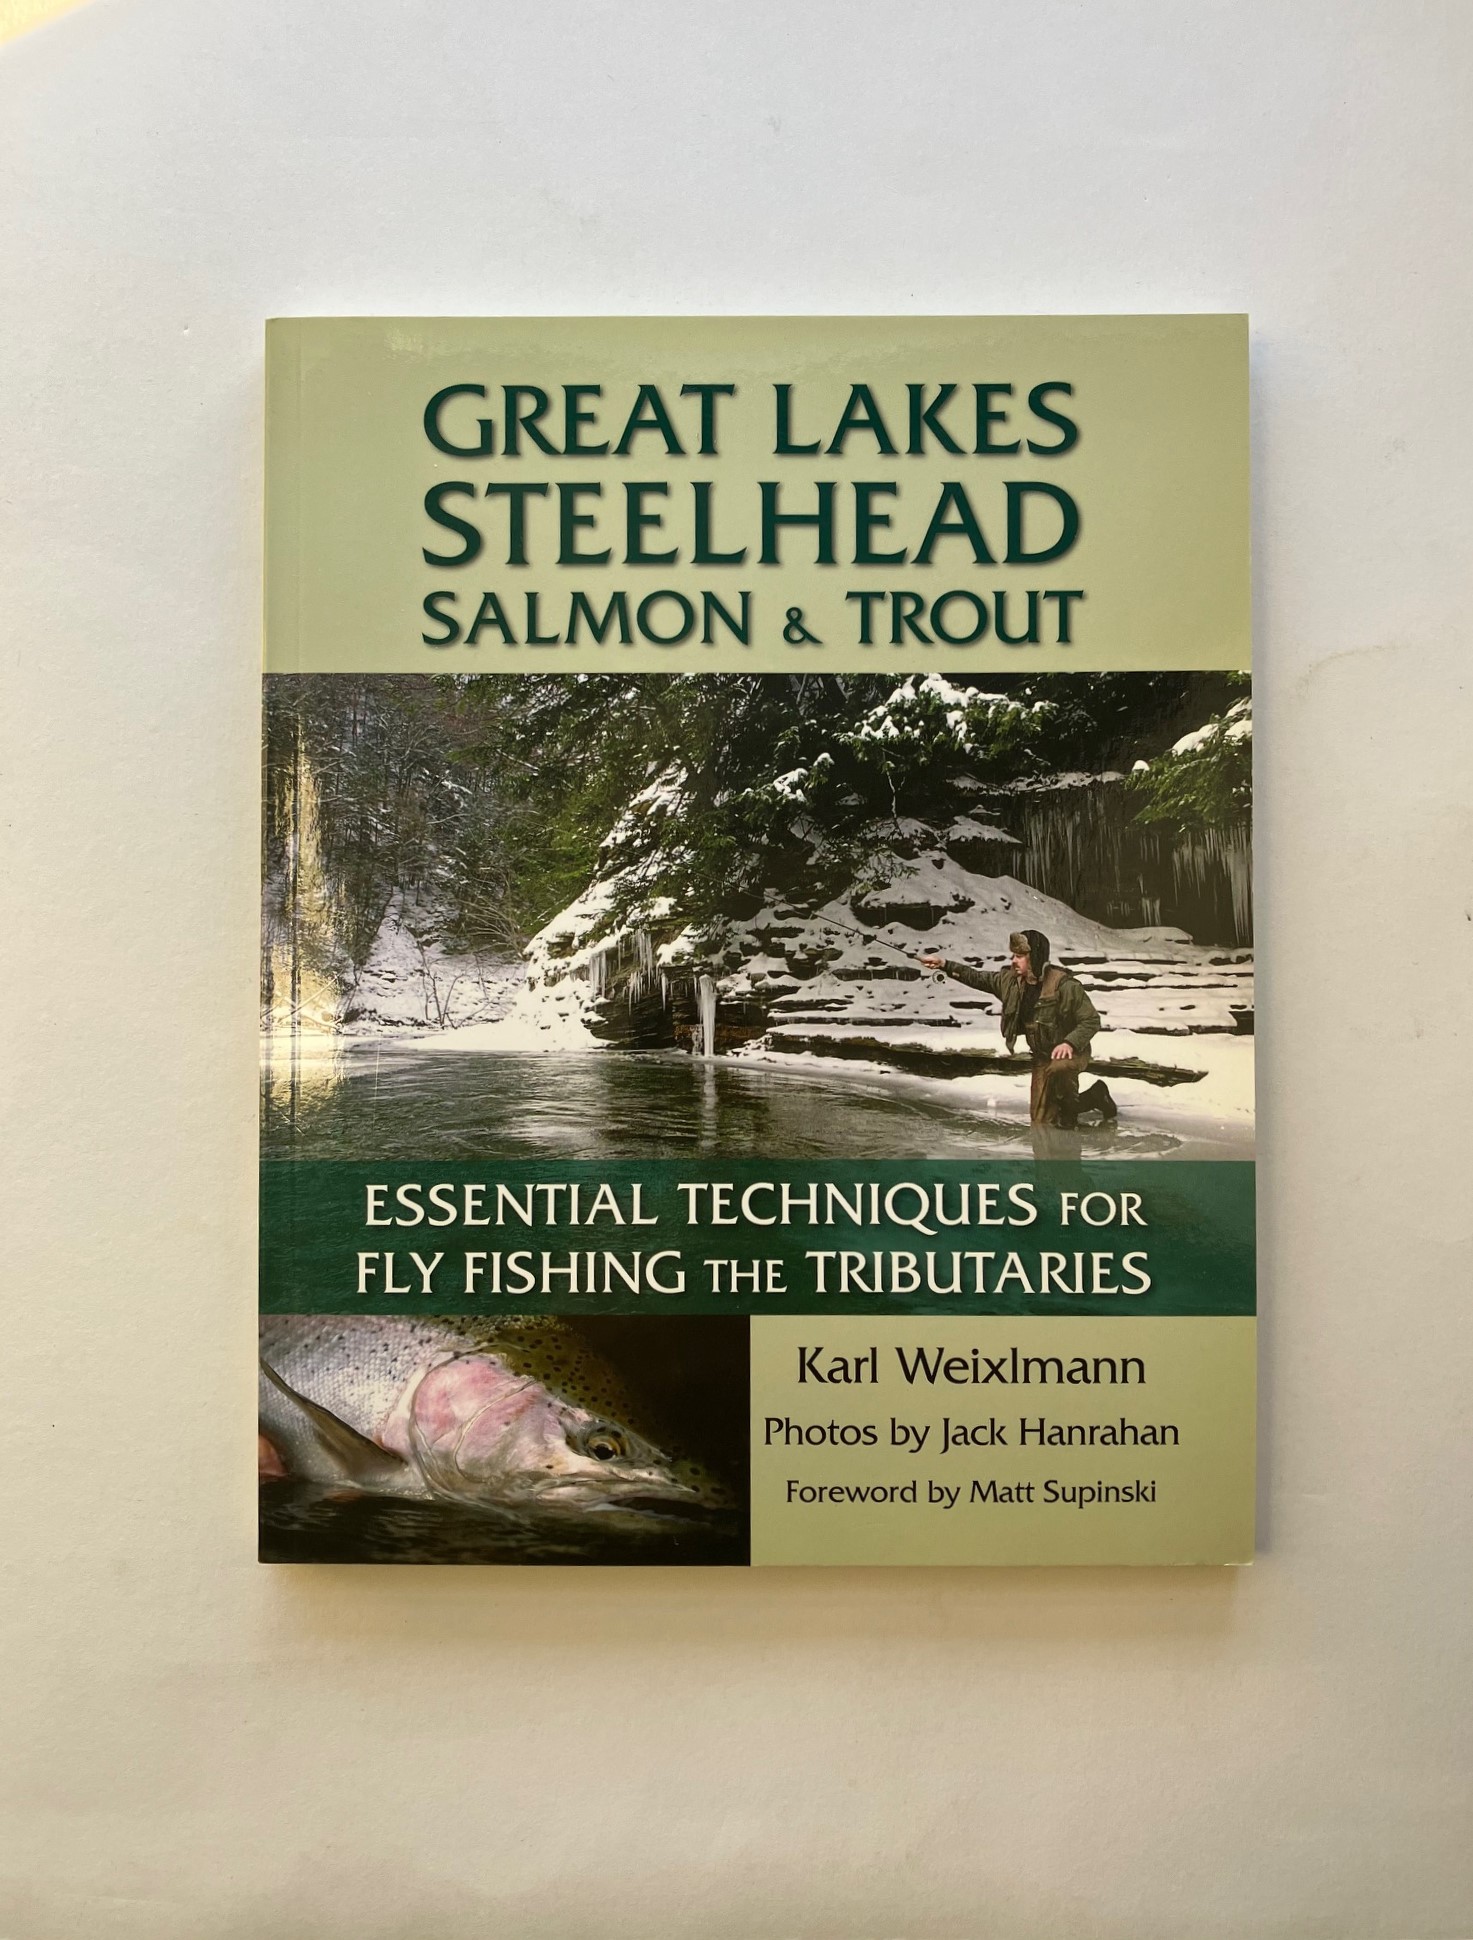 Fishing Books on Rod, Line,Fly and Salmon Fishing. Catching Trout